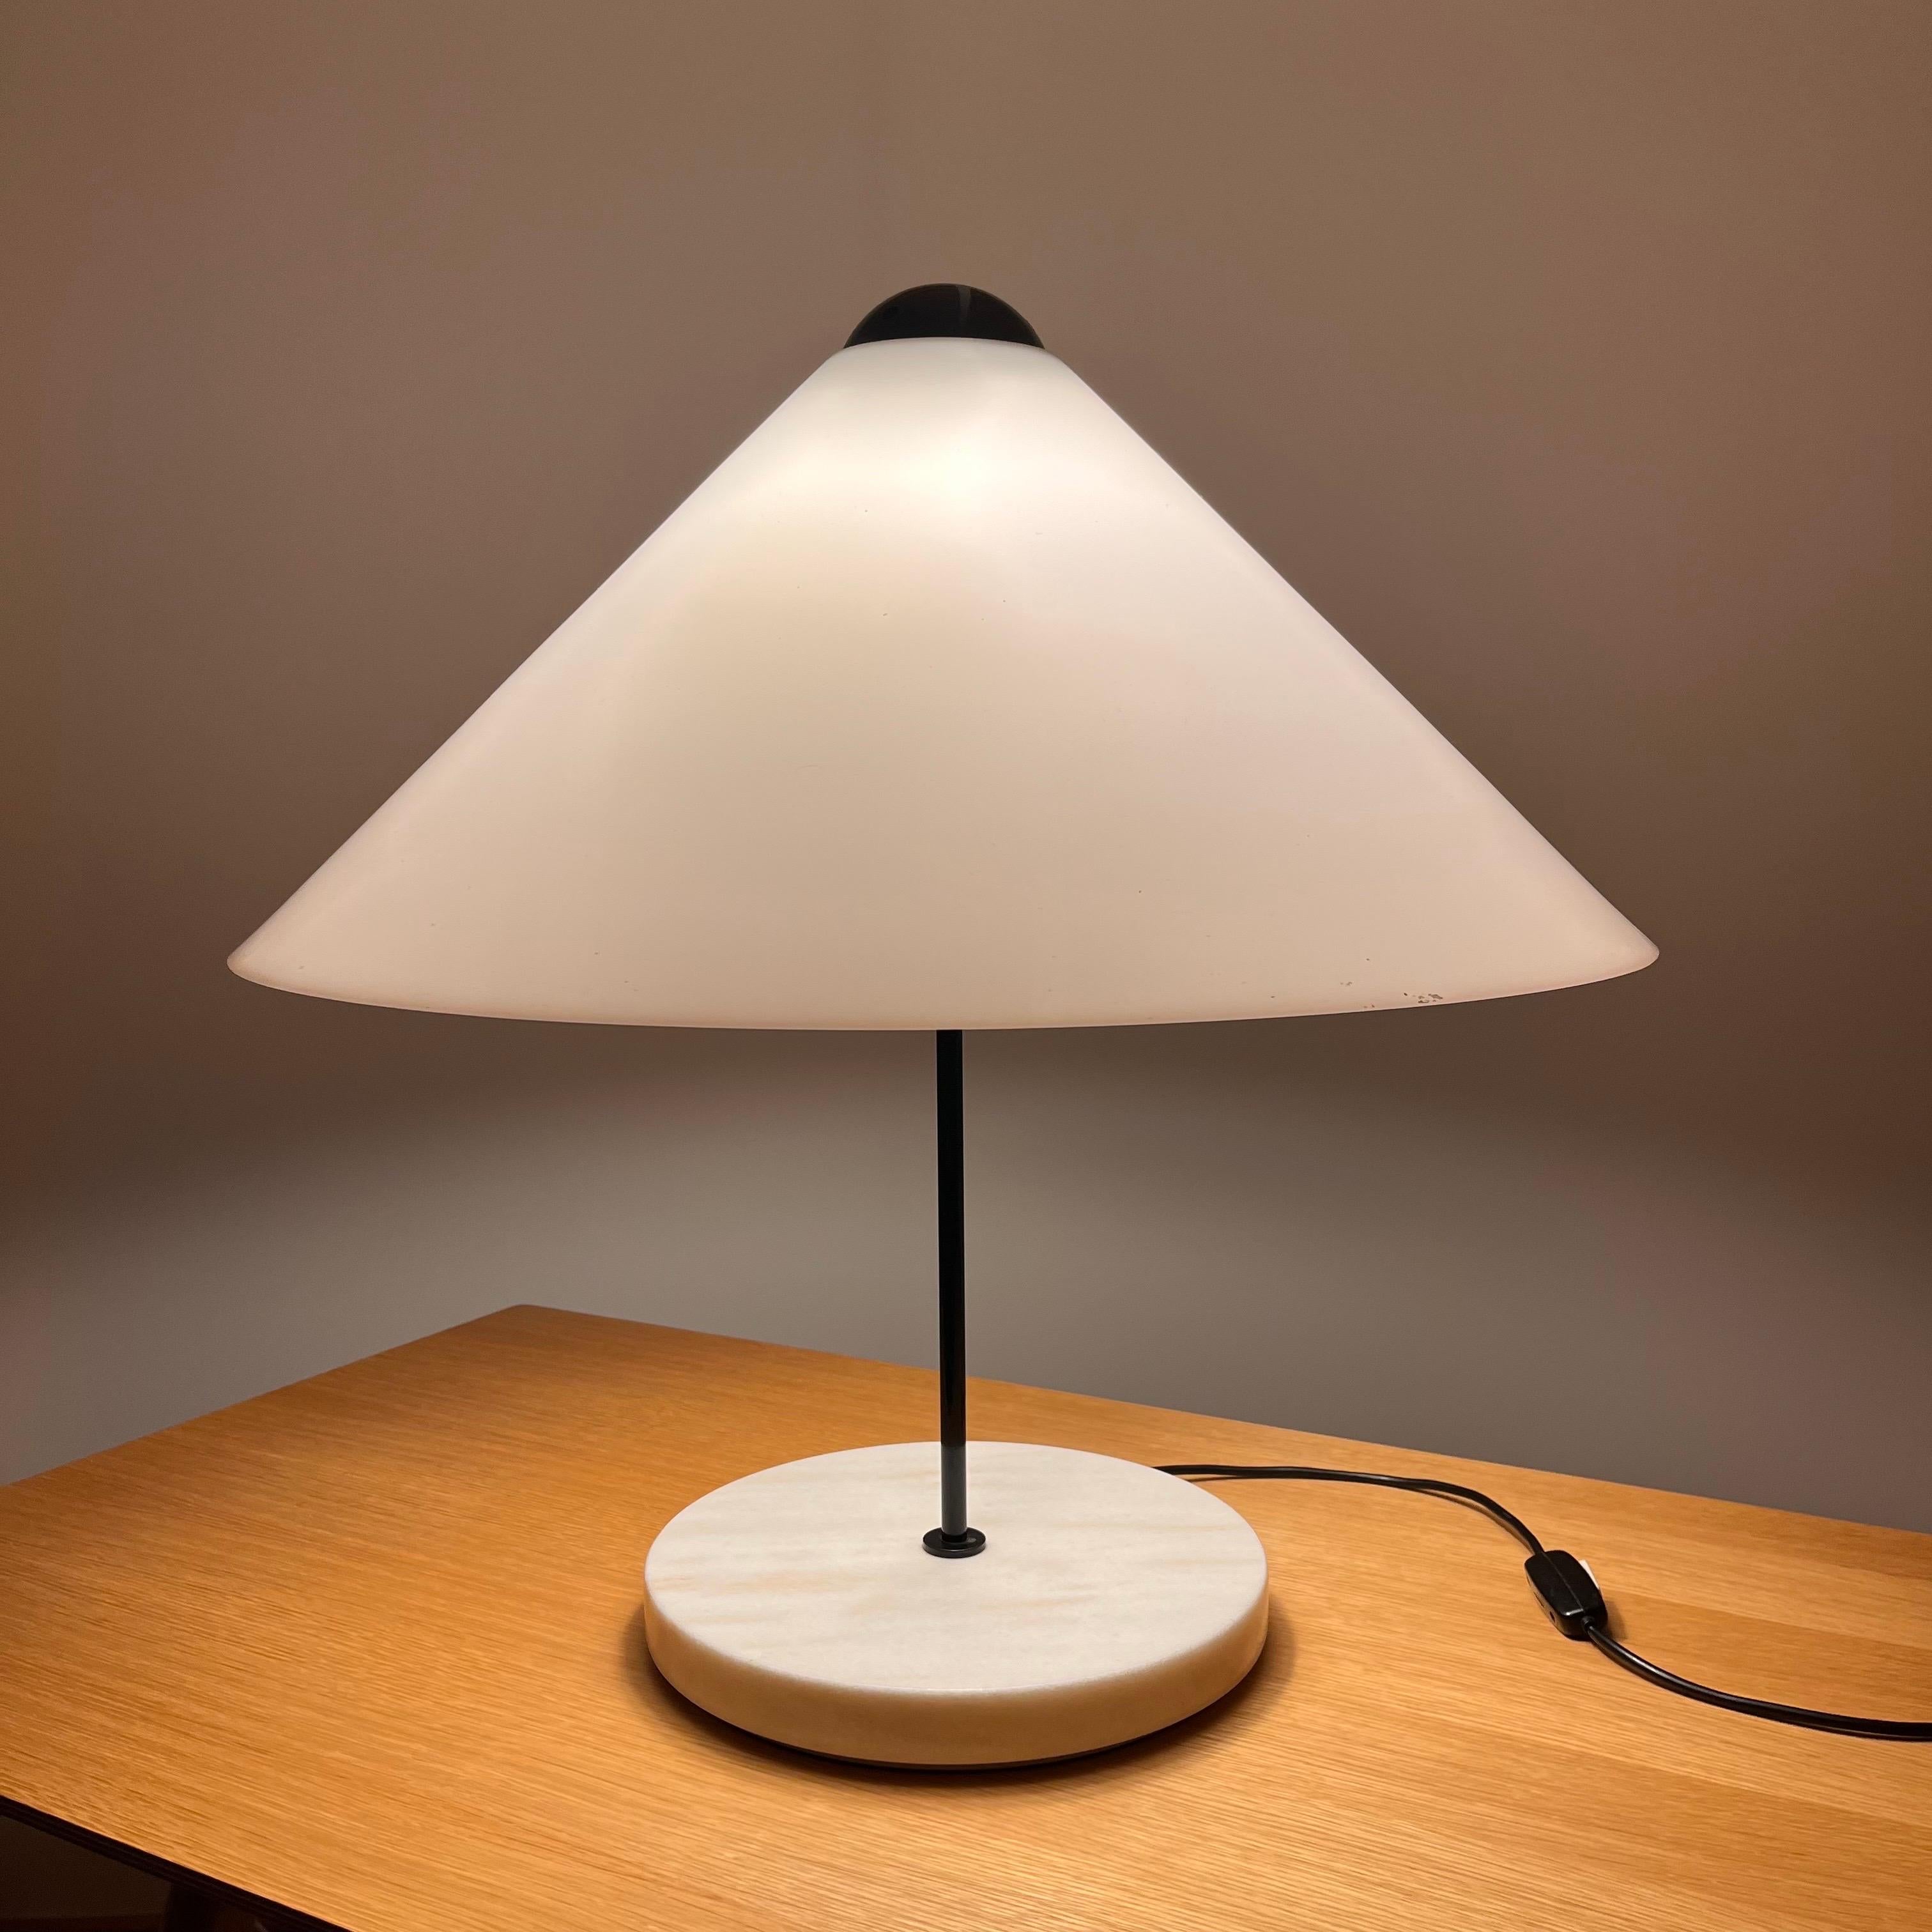 Vico Magistretti (1920-2006)

Snow 201

A metal and methacrylate table lamp, the white methacrylate conical shade resting on a black lacquered metal sphere issuing two light bulbs on a black thin cylindrical stem on a white marble circular